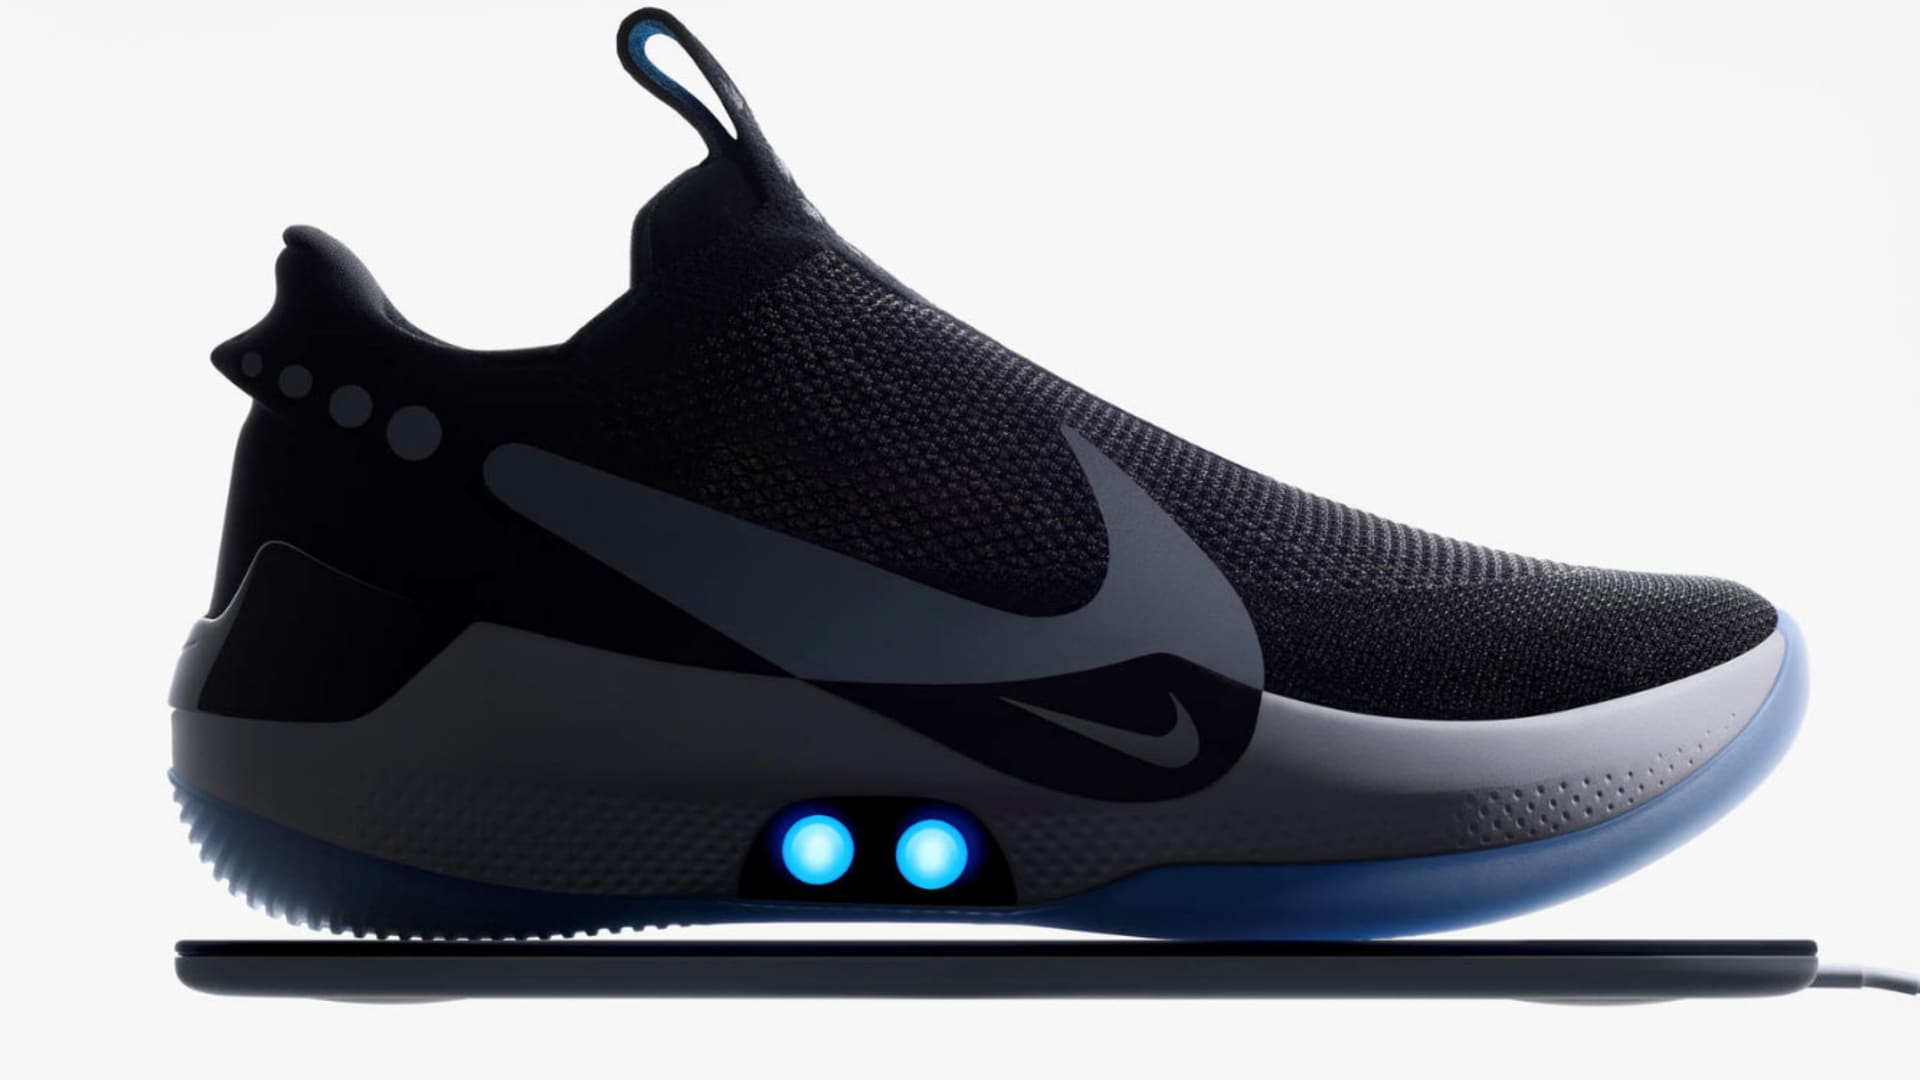 You Can Lace Nike'S Adapt Bb Shoes With A Smartphone App